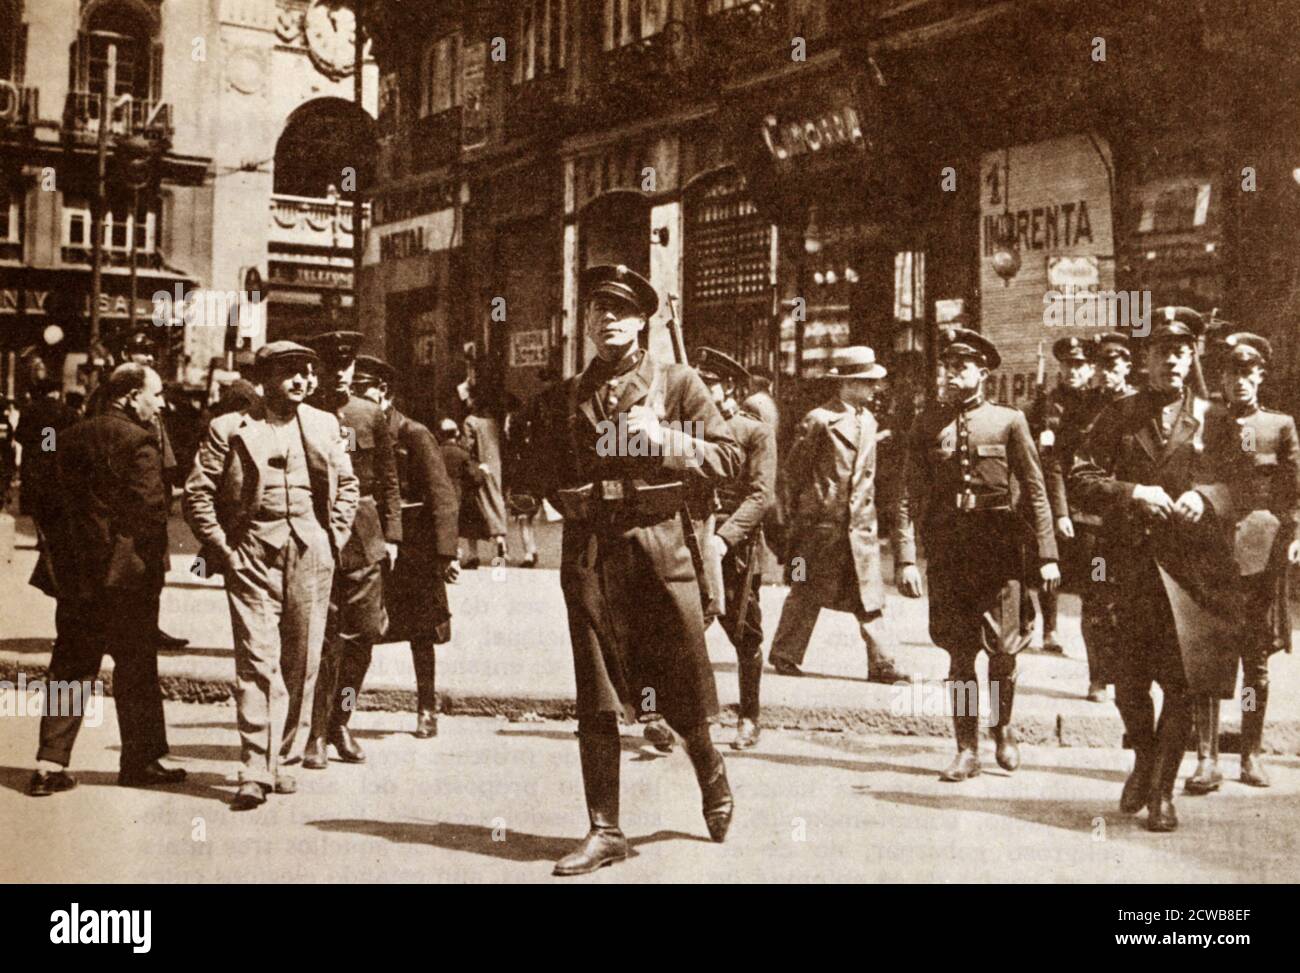 Police patrolling the streets of Madrid during the 1934 General Strike. The Revolution of 1934, also known as the Revolution of October 1934 or the Revolutionary General Strike of 1934, was a revolutionary strike movement that took place between 5 and 19 October 1934, during the black biennium of the Second Spanish Republic. The strikes were triggered by the entry of the conservative Spanish Confederation of the Autonomous Right (CEDA) into the Spanish government. Most of the events occurred in Catalonia and Asturias and were supported by many Spanish Socialist Workers' Party (PSOE) and Genera Stock Photo